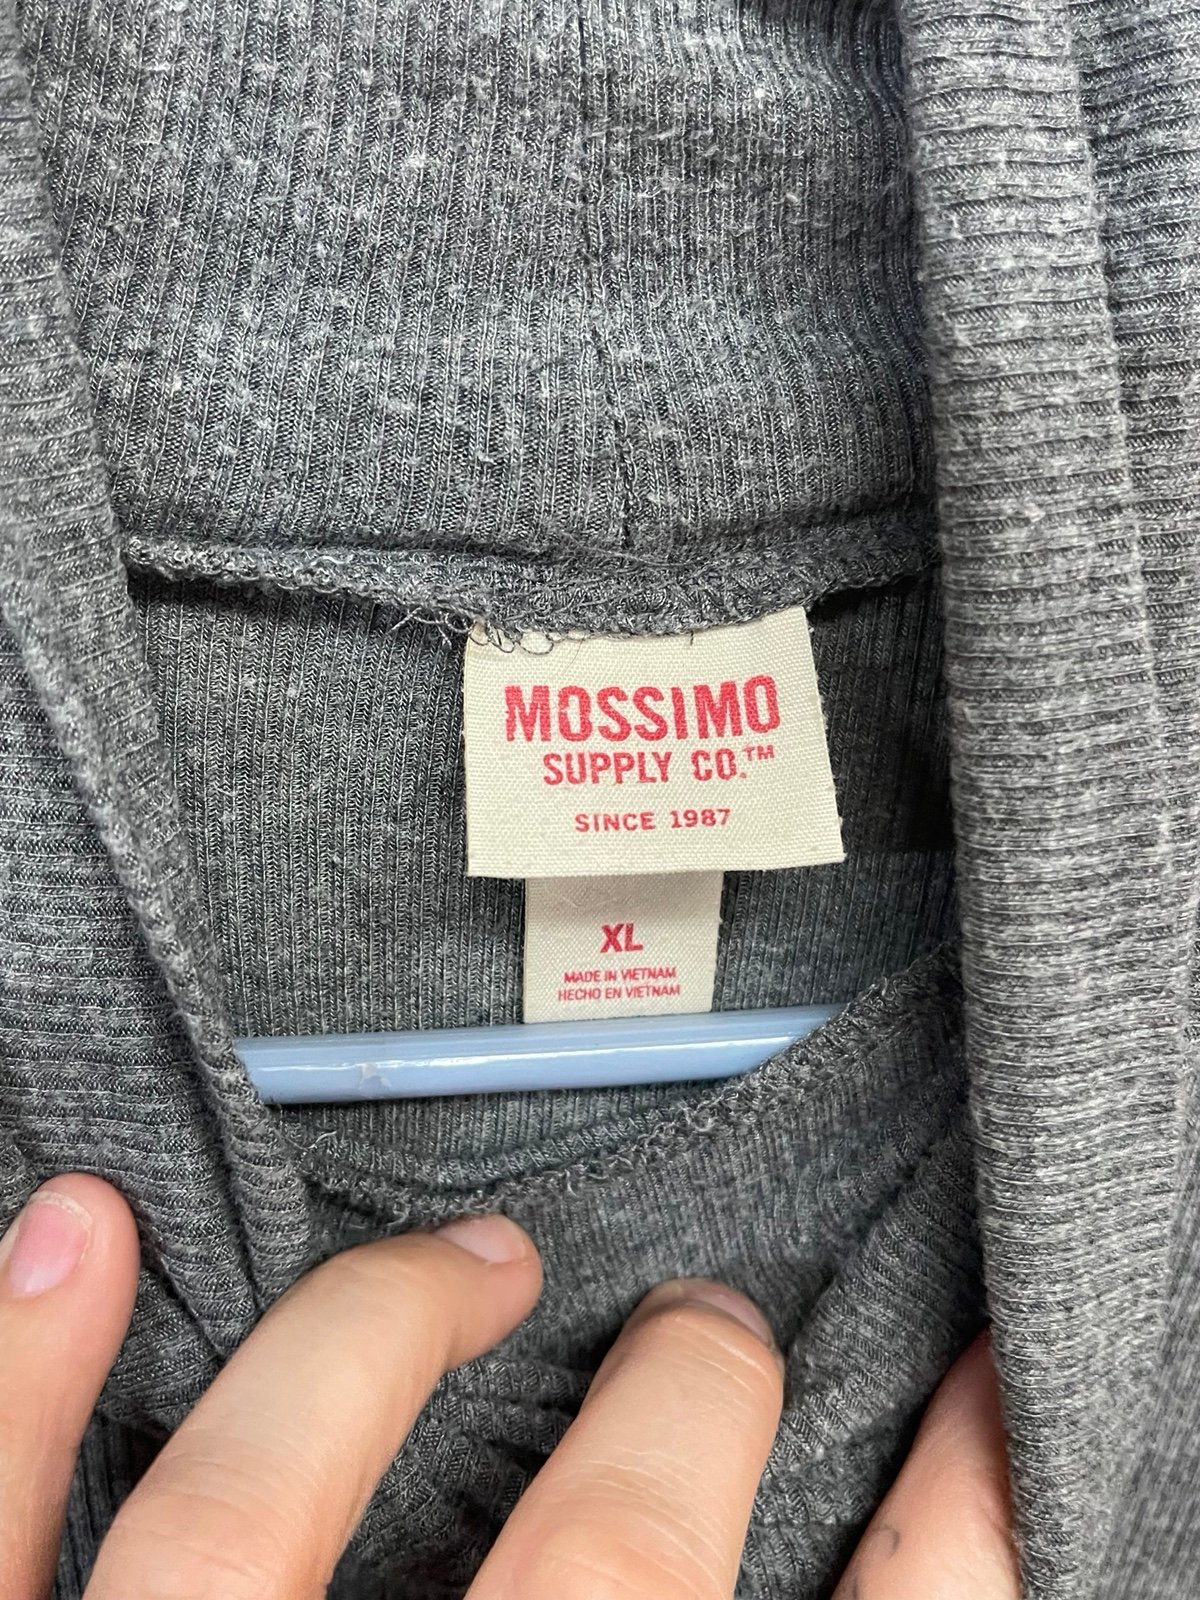 High quality Mossimo XL cowl neck sweater Po9uQCZHm for sale